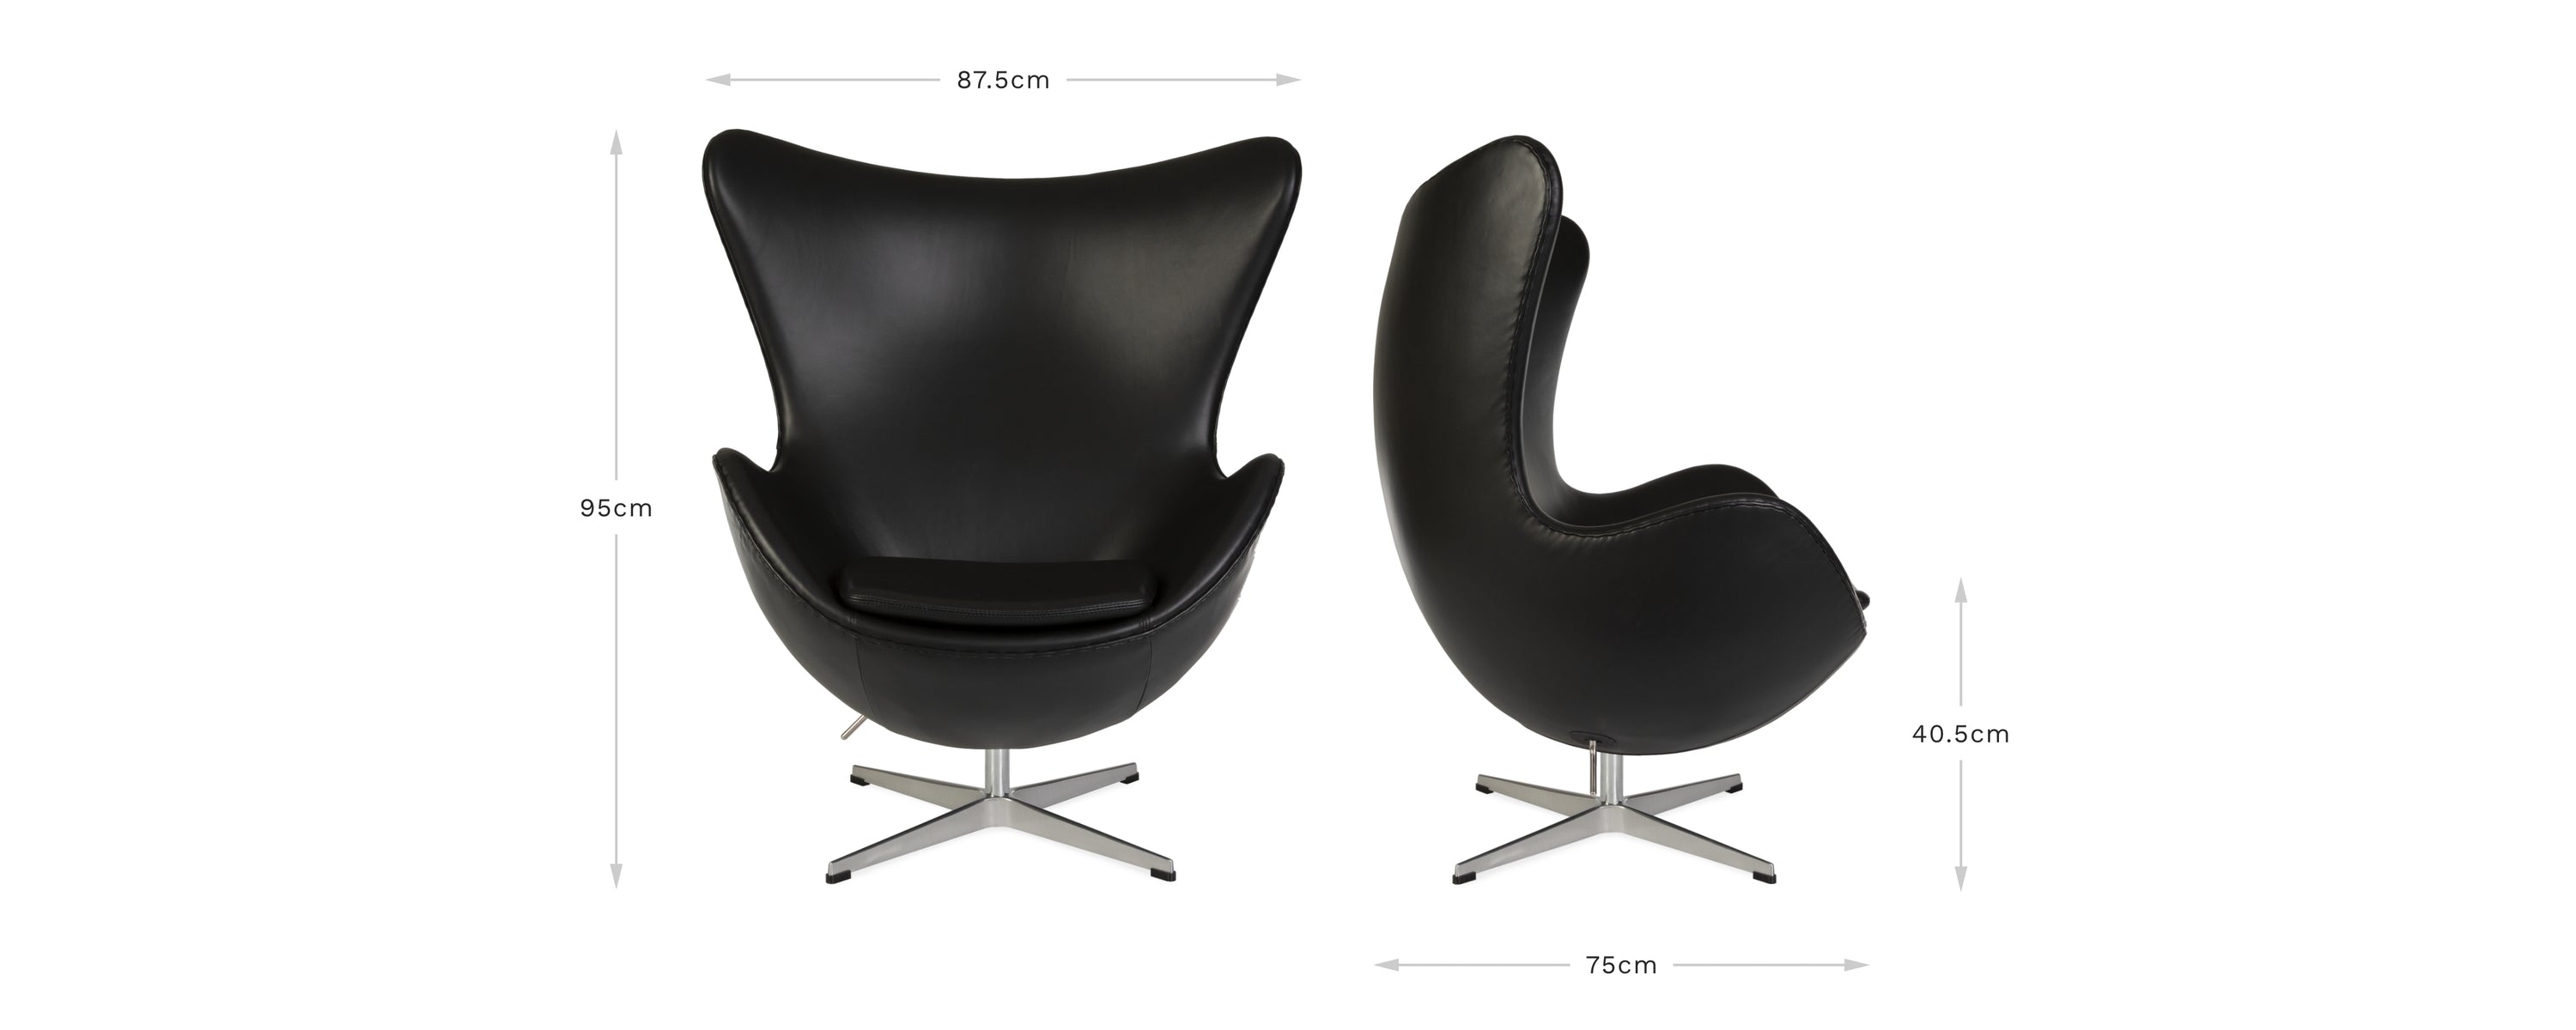 View of front and side of the black leather Jacobsen Egg Chair on a white background displaying the dimensions